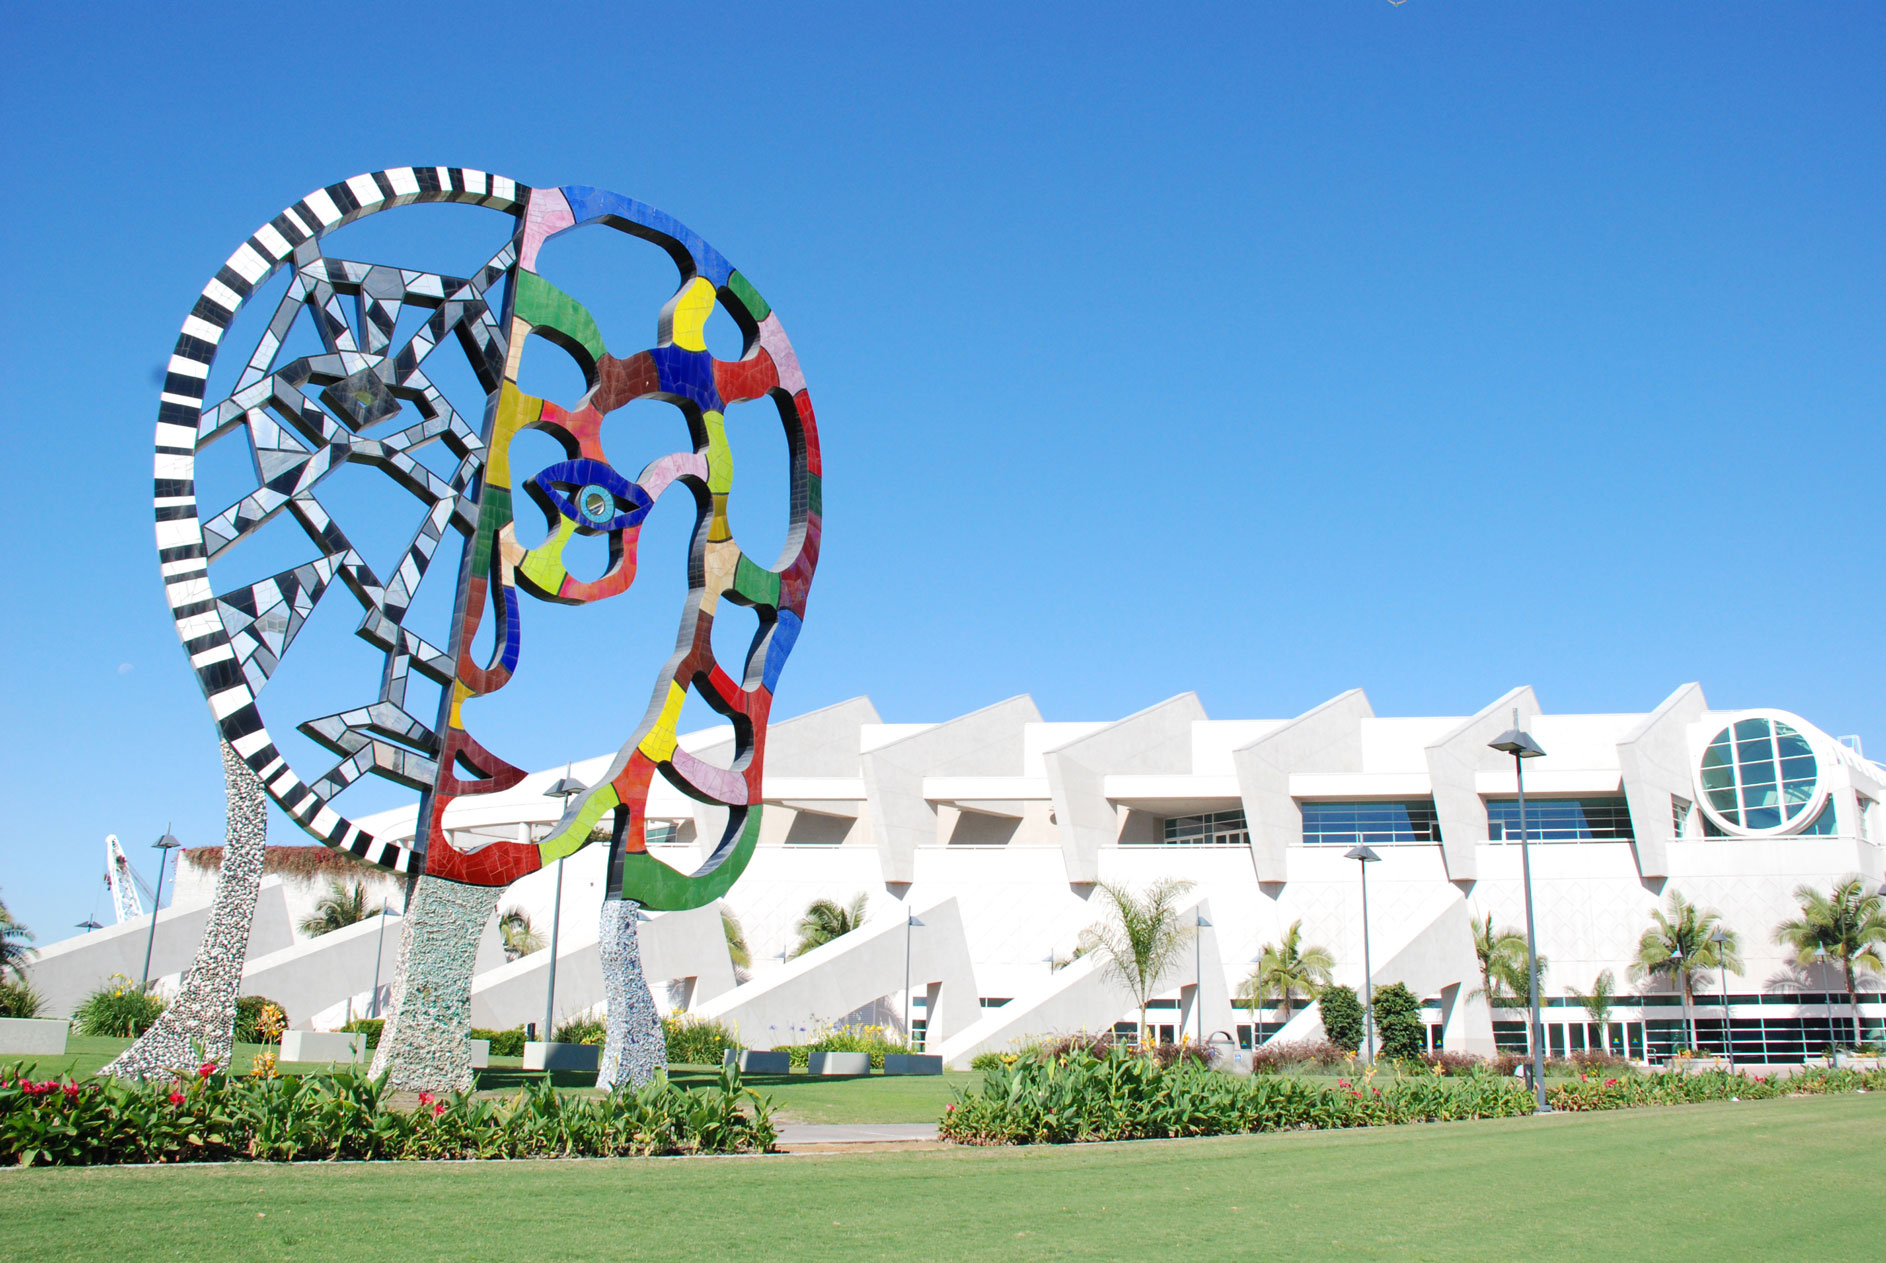 The large colorful sculpture titles "Coming Together" stands on the South end of the Convention Center in San Diego, California.